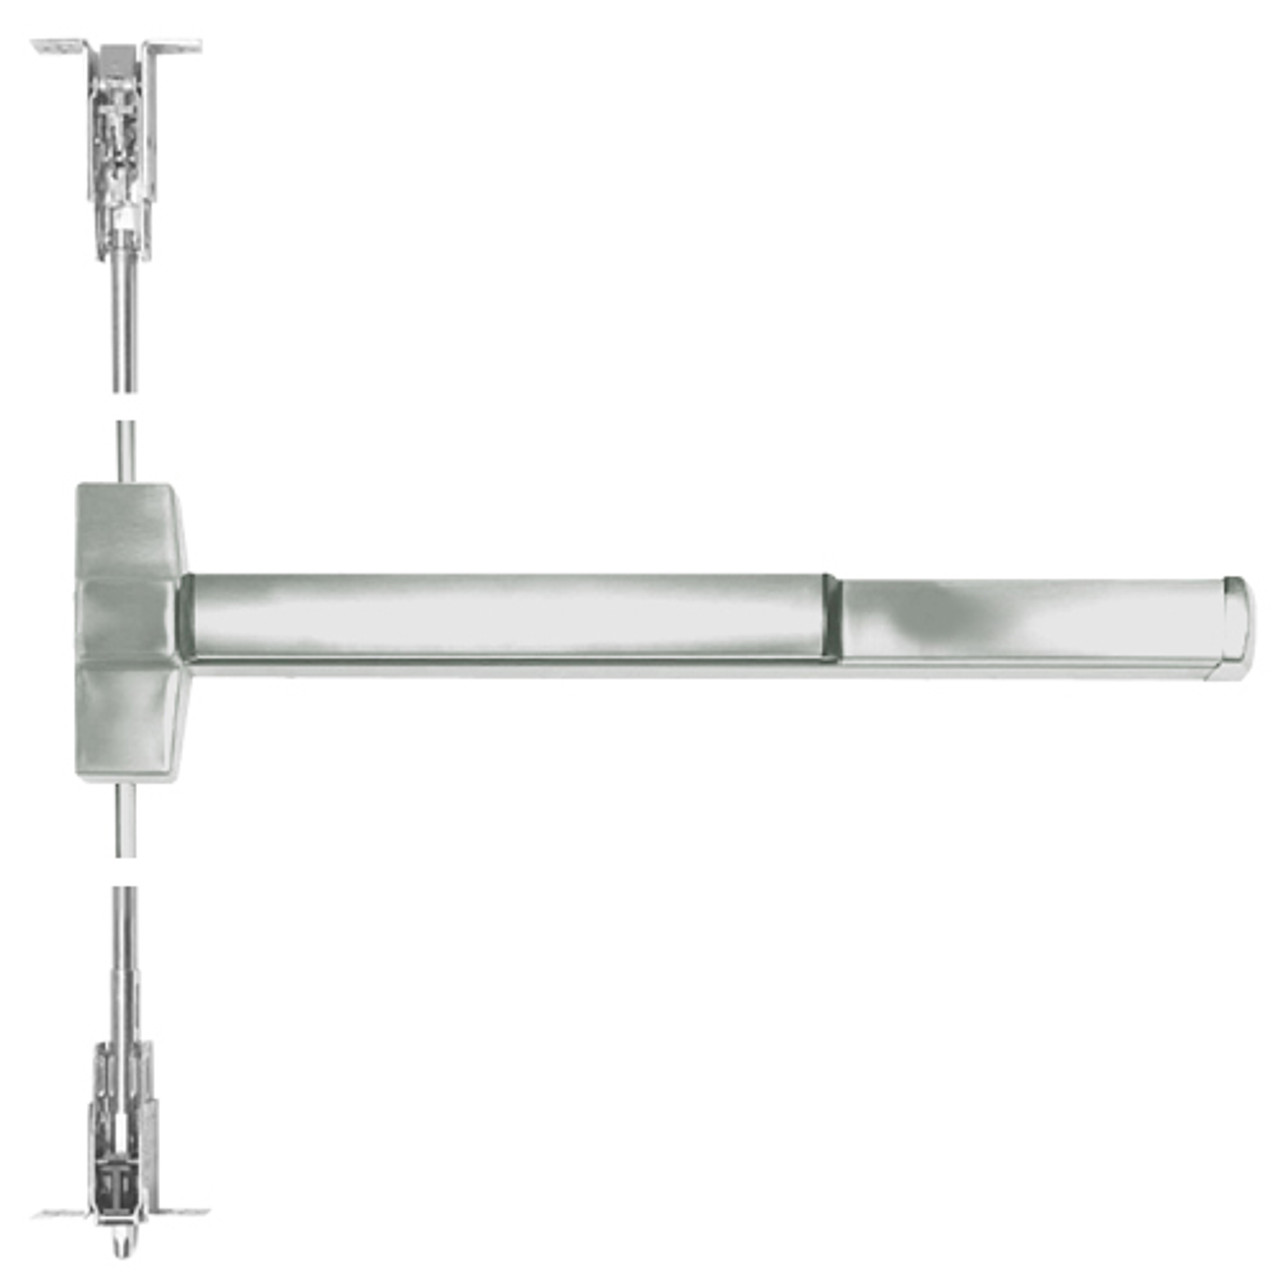 ED5860B-619-W048 Corbin ED5800 Series Fire Rated Concealed Vertical Rod Device in Satin Nickel Finish